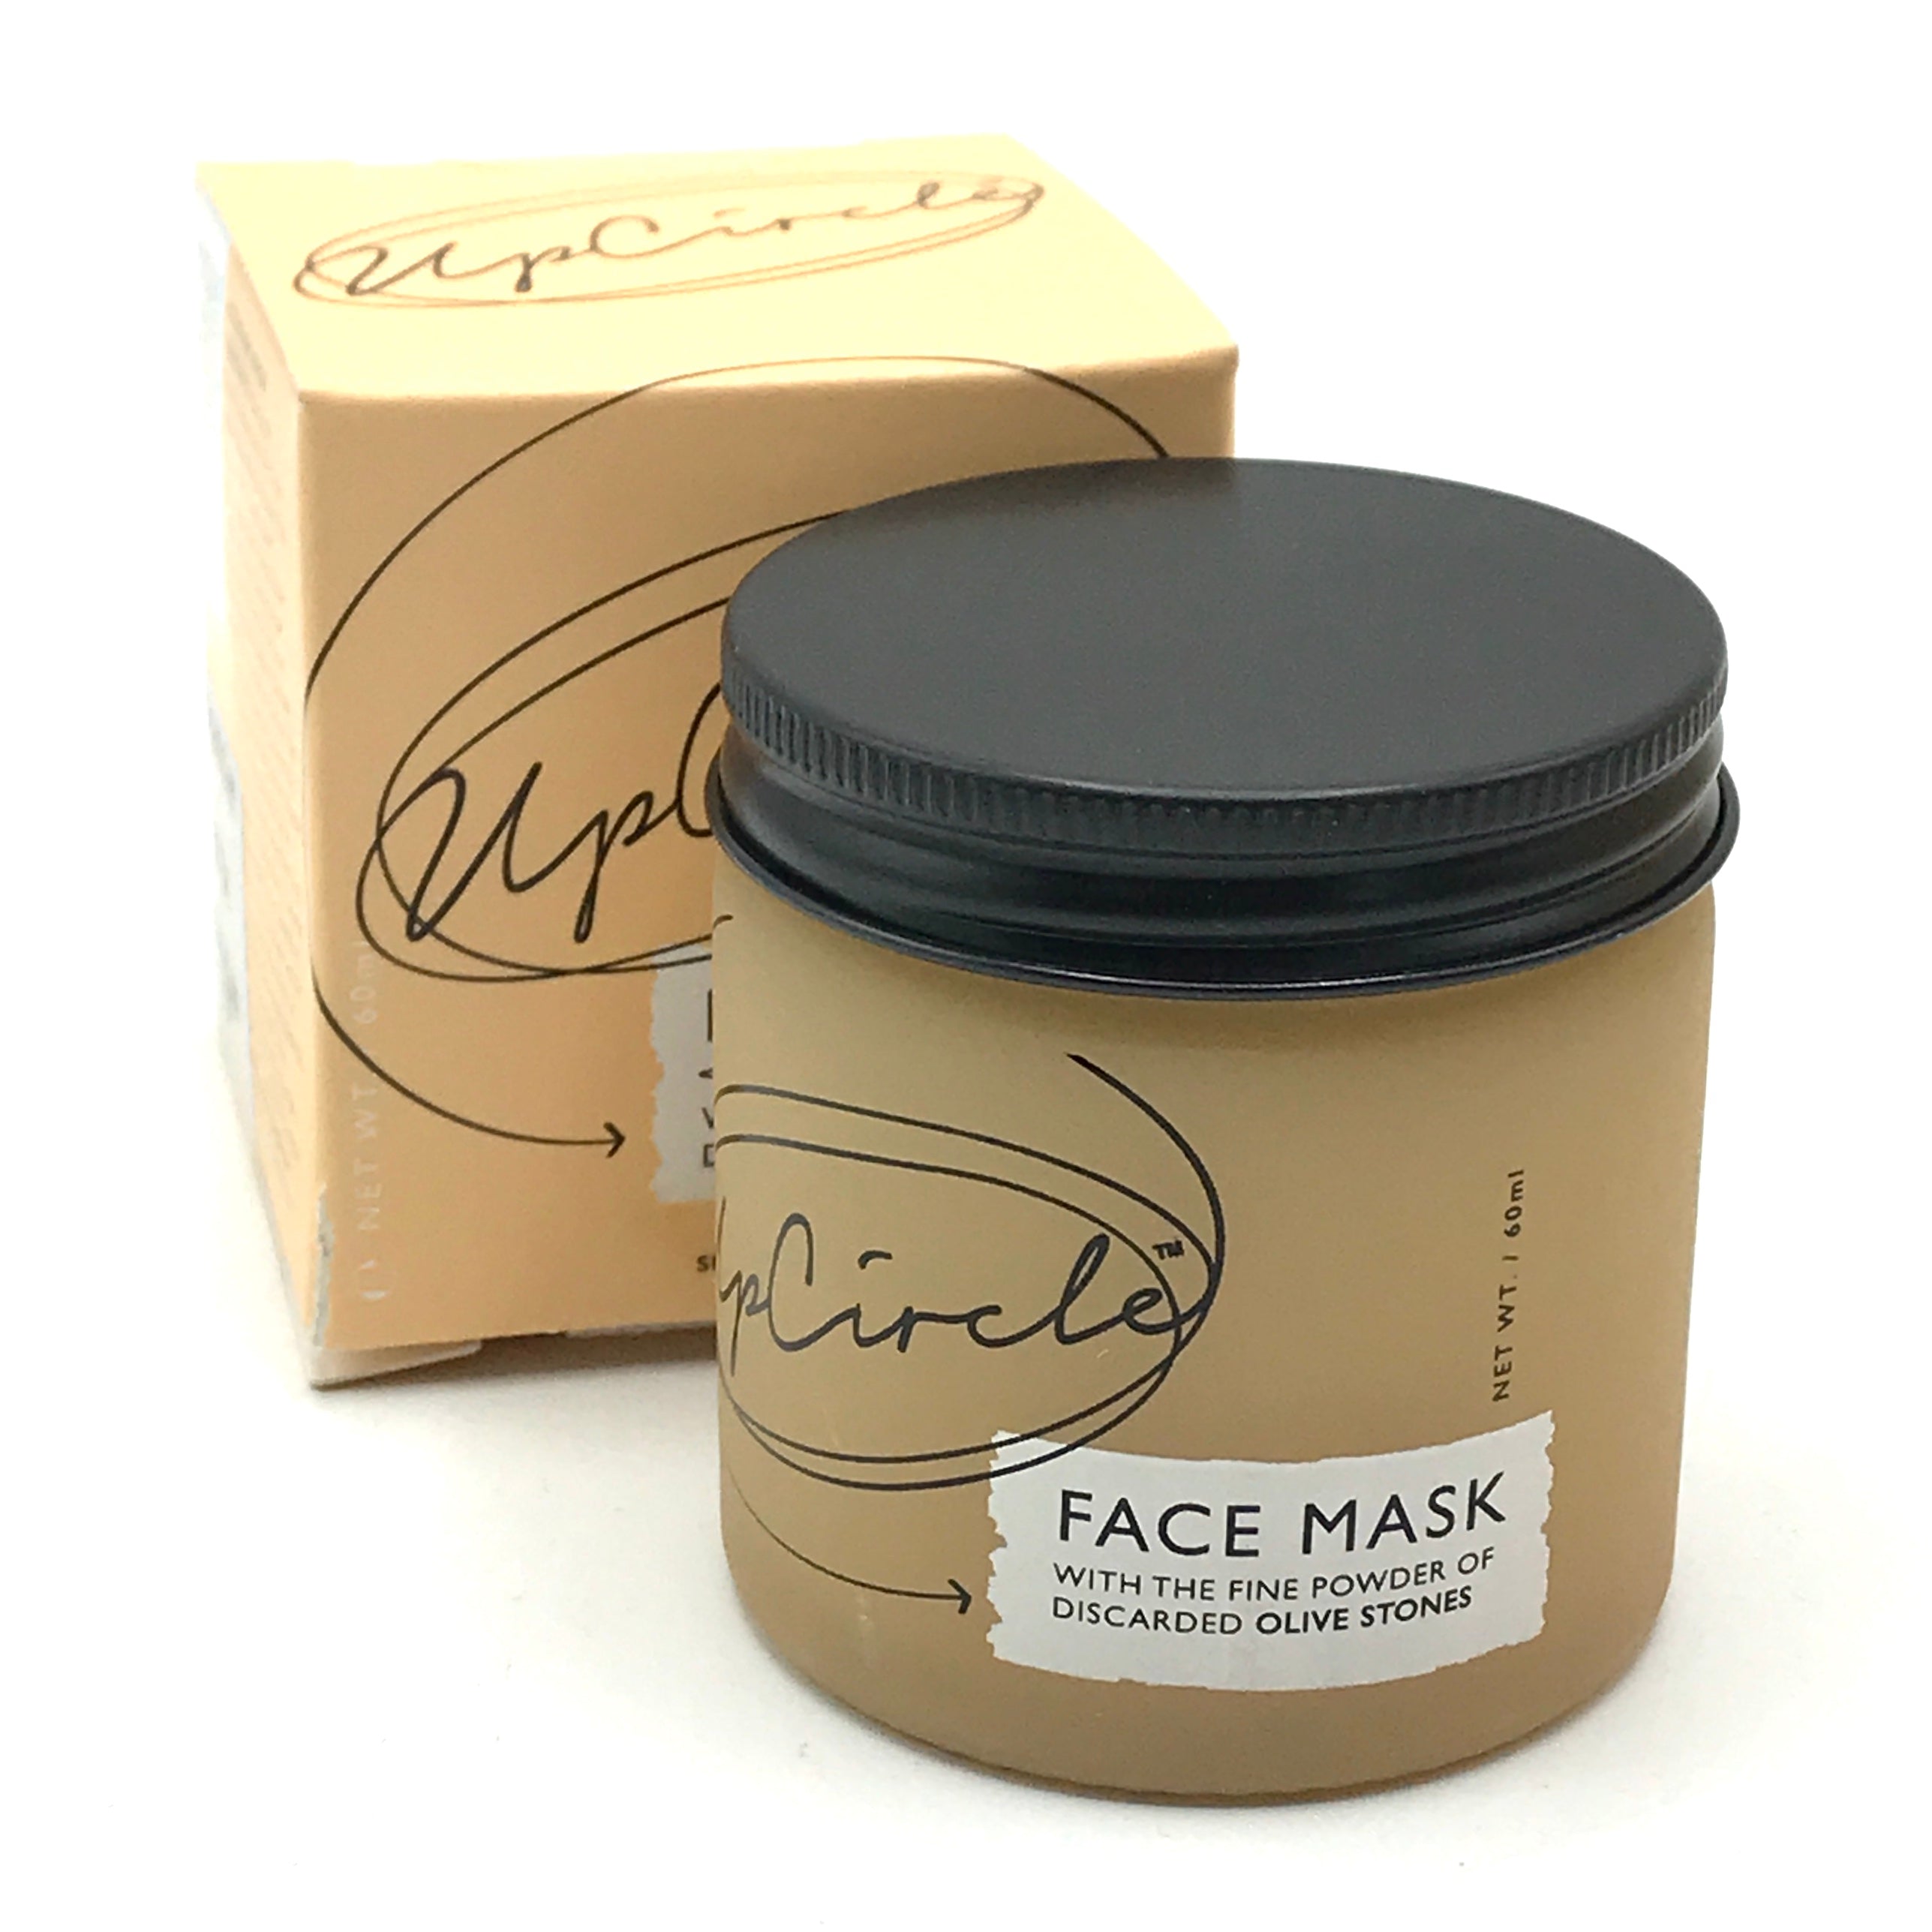 Up Circle Face Mask - Bagel&Griff